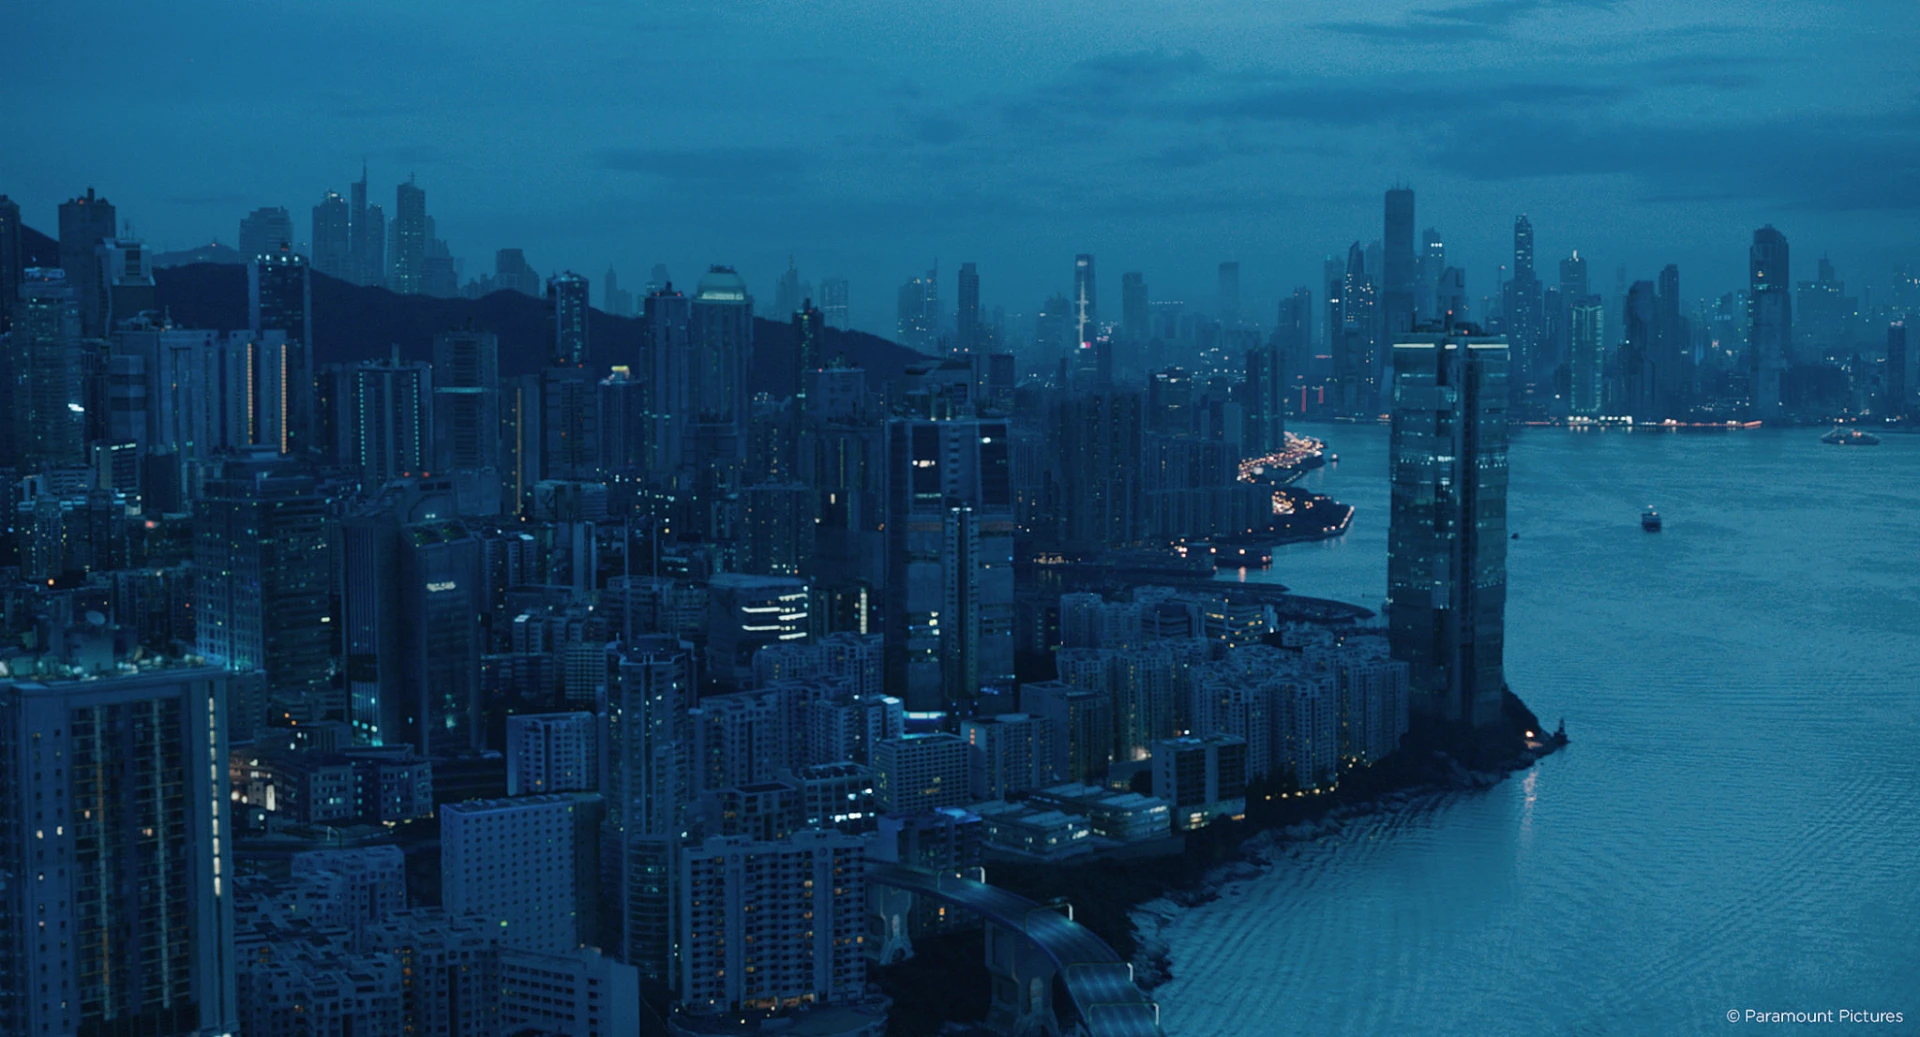 Ghost in the shell skyscraper city view from Raynault vfx